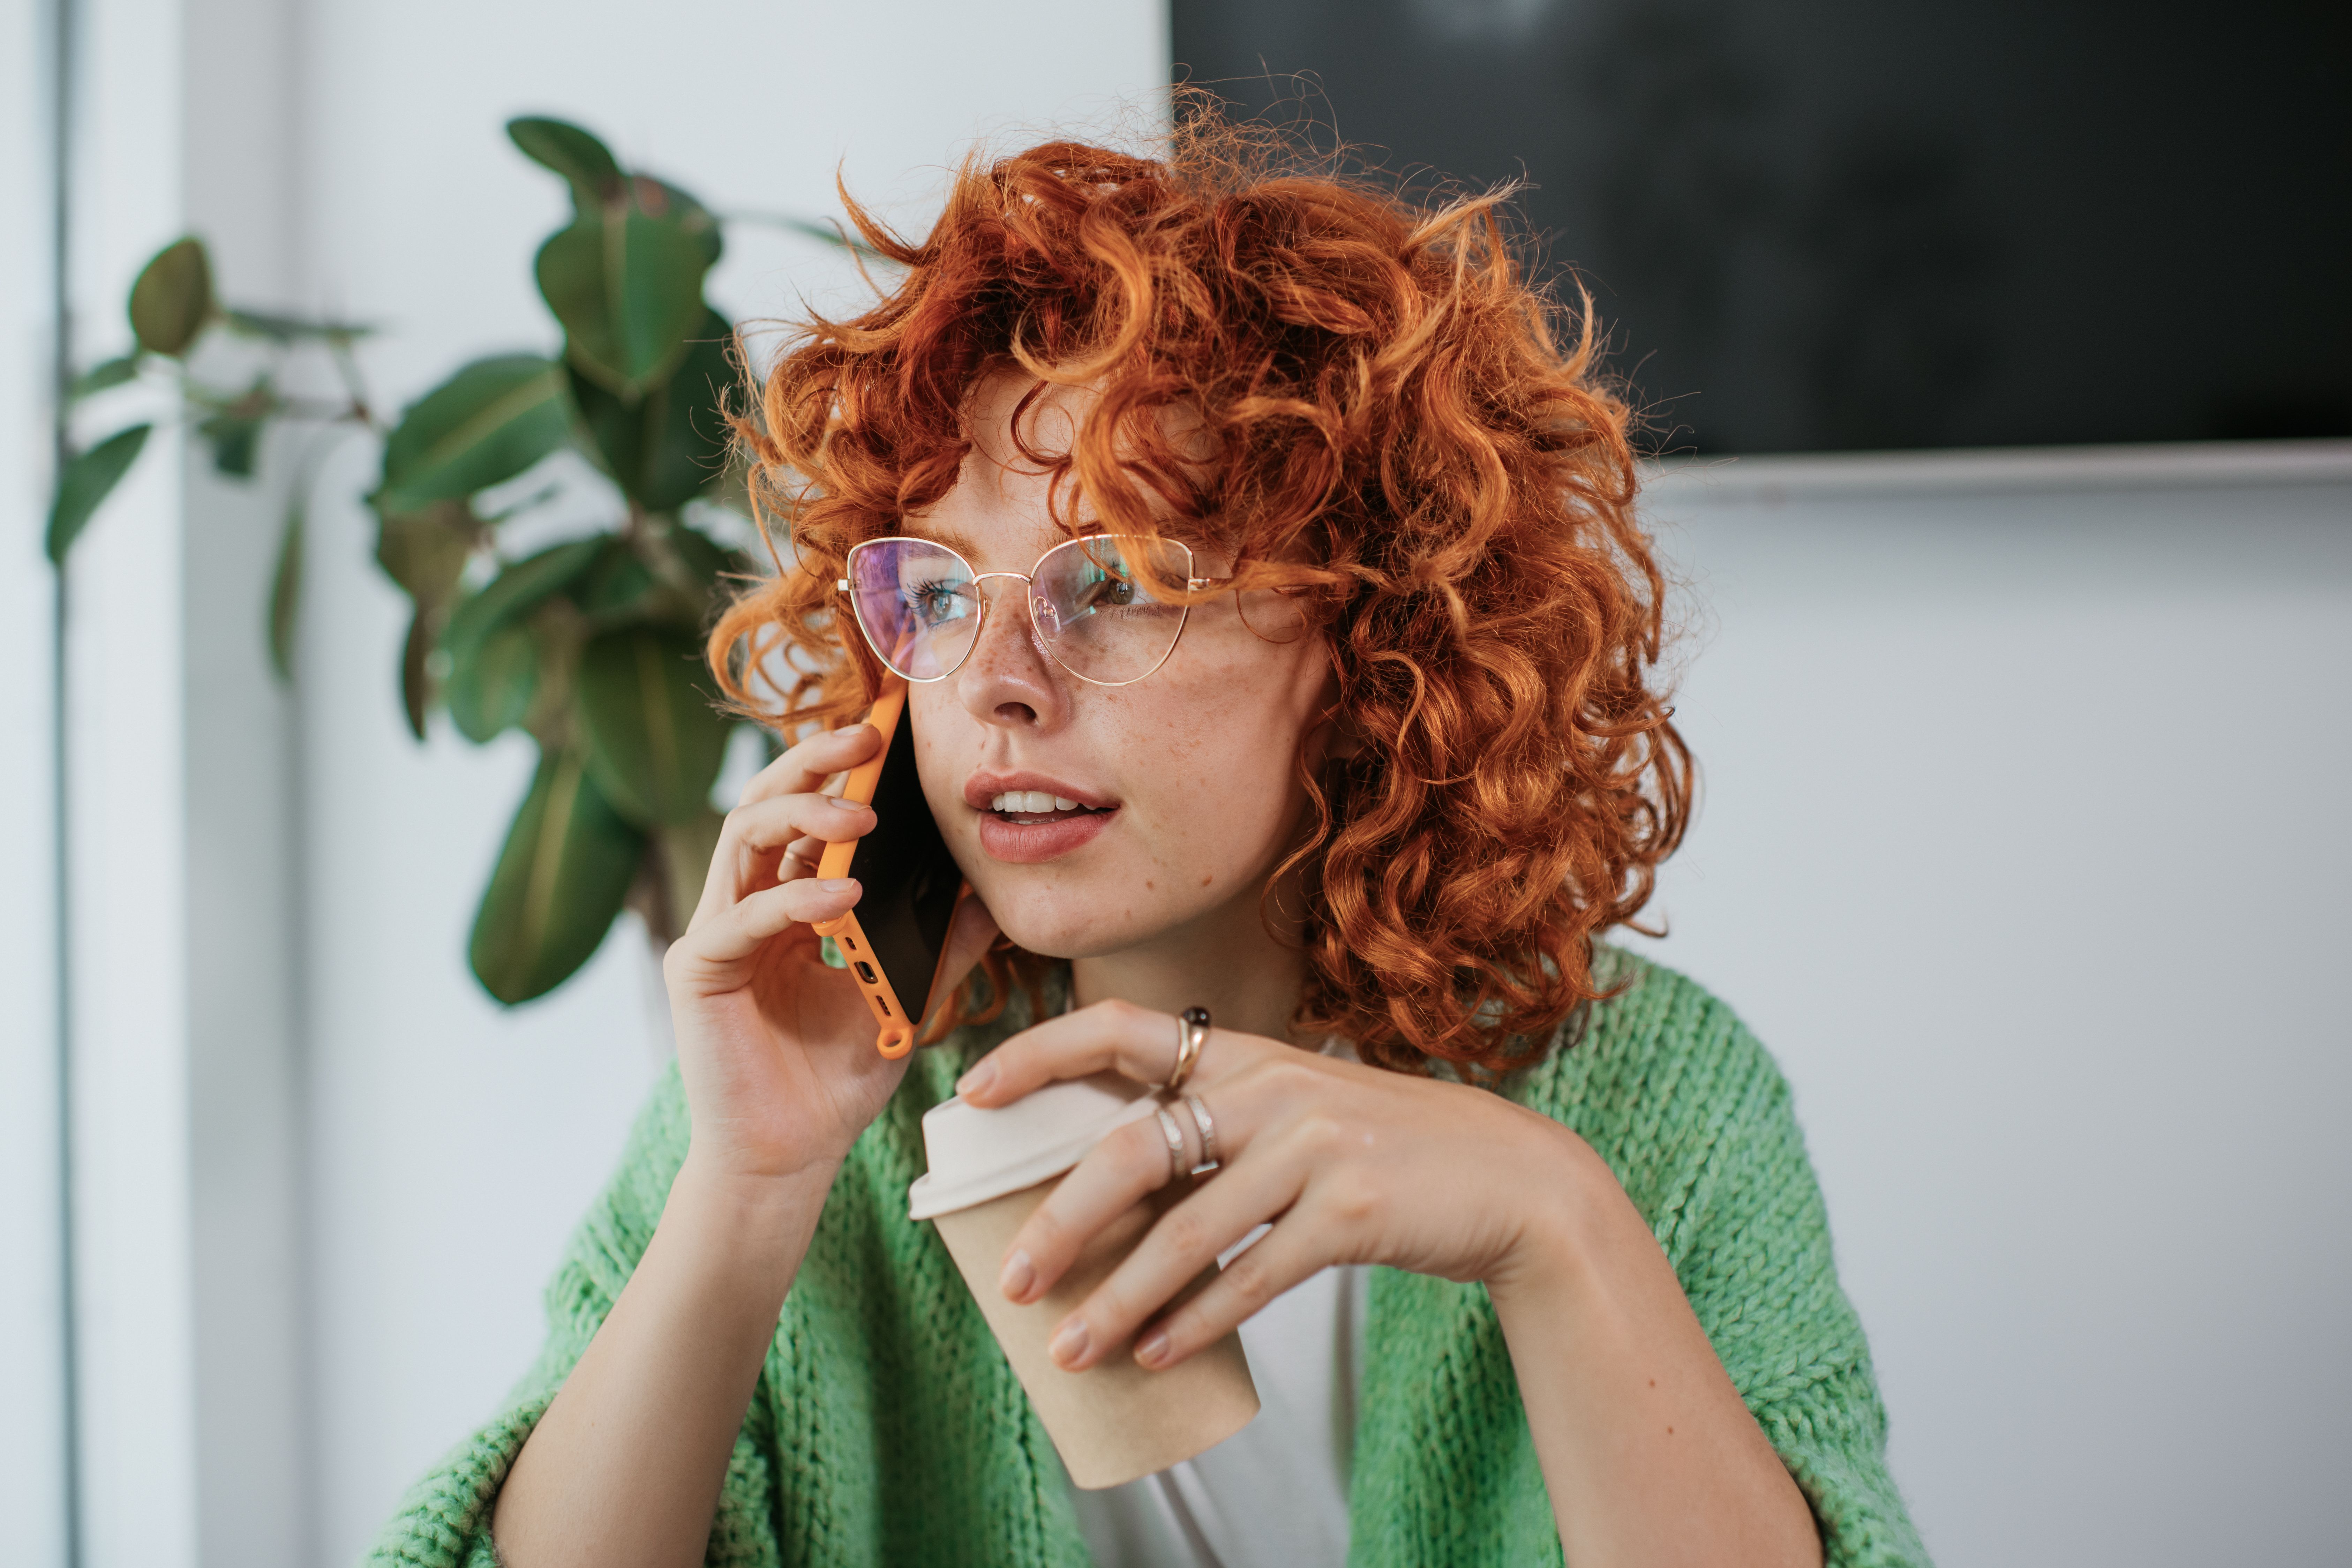 Girl with curly red hair and glasses holding a phone to her ear in one hand and a coffee in the other hand